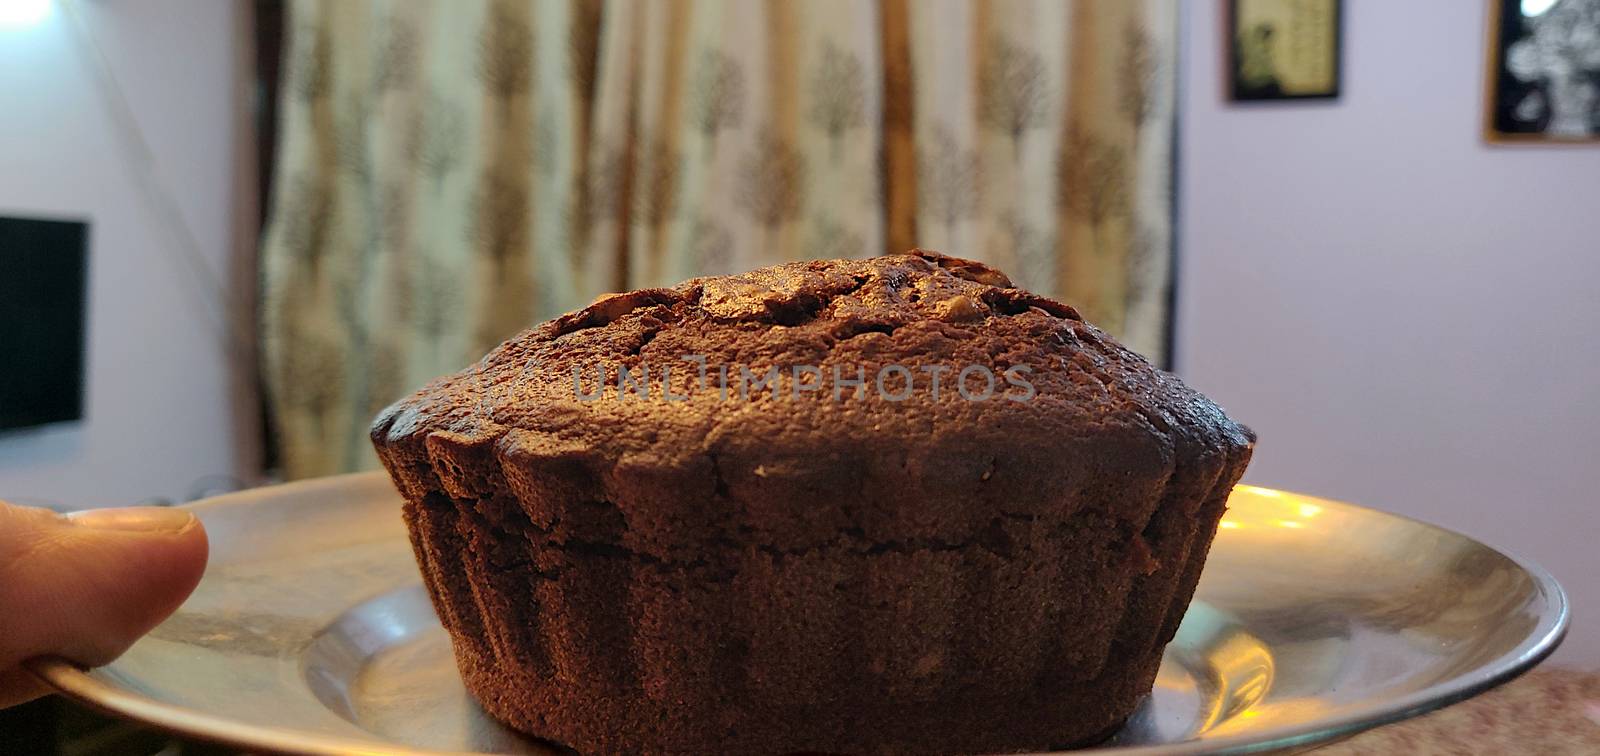 A close up of chocolate walnut muffin on a steel plate held up in the air by a hand against the wall of the house